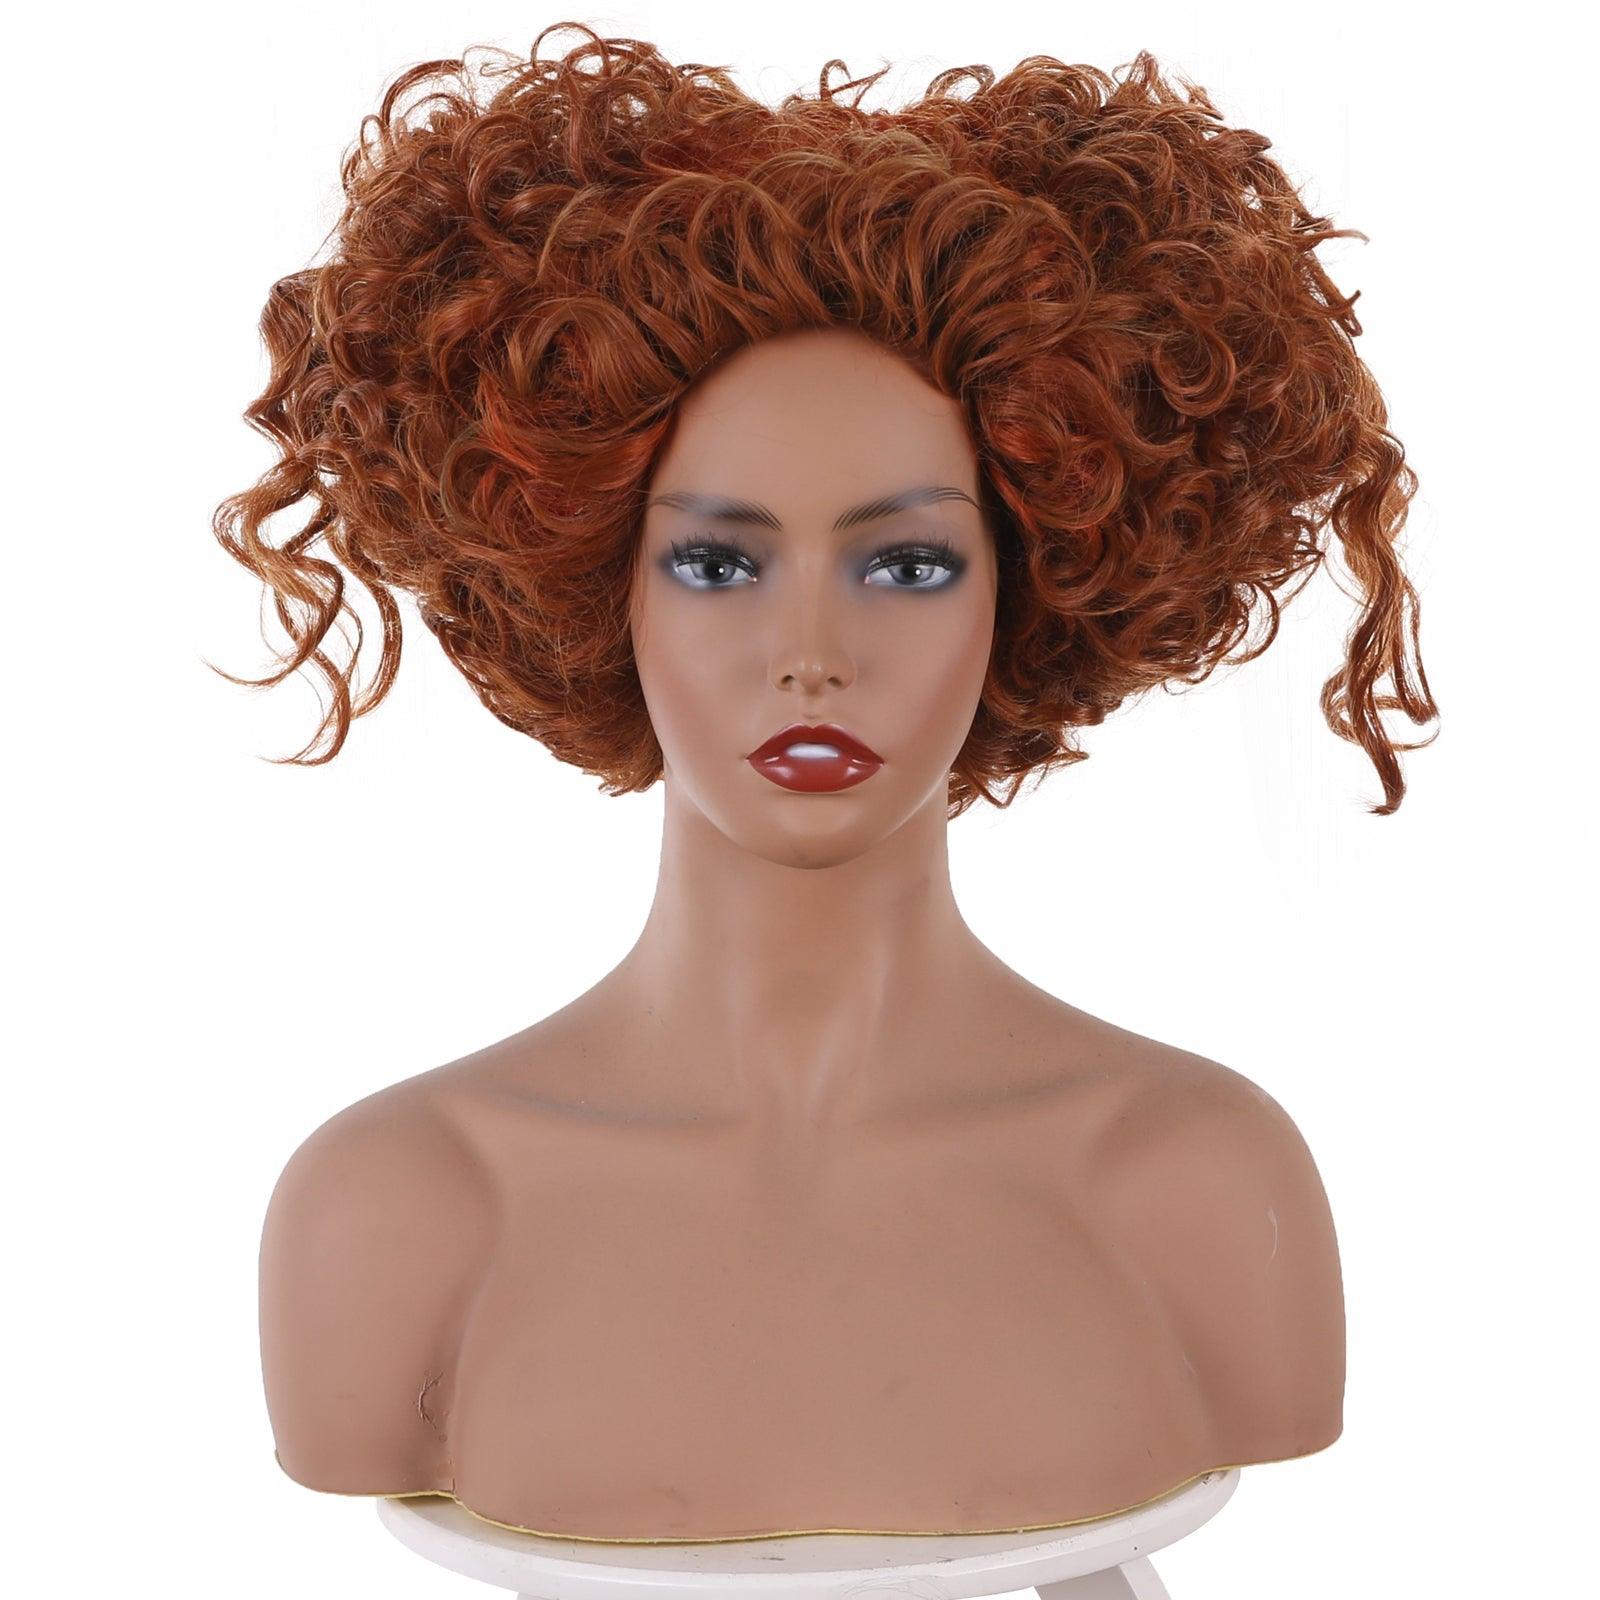 Hocus Pocus 2 Winifred Sanderson Heart-shaped Brown Movie cosplay Wig 405S - coscrew